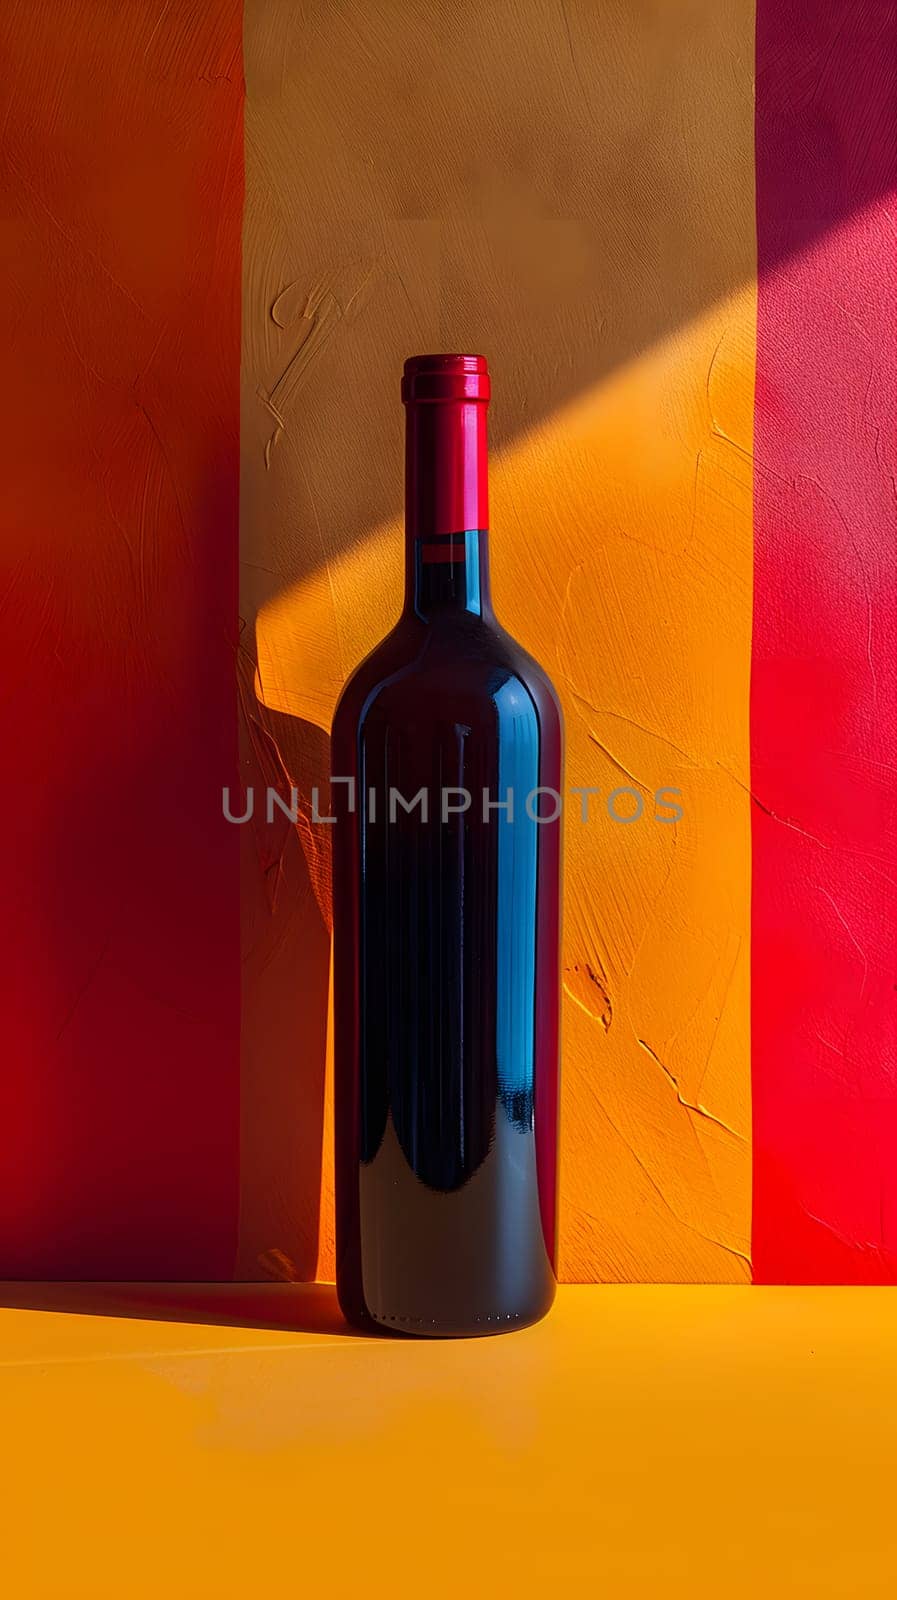 A glass bottle containing red wine sits elegantly on a vibrant yellow table, sealed with a cork bottle stopper. The liquid inside is a rich alcoholic beverage waiting to be enjoyed